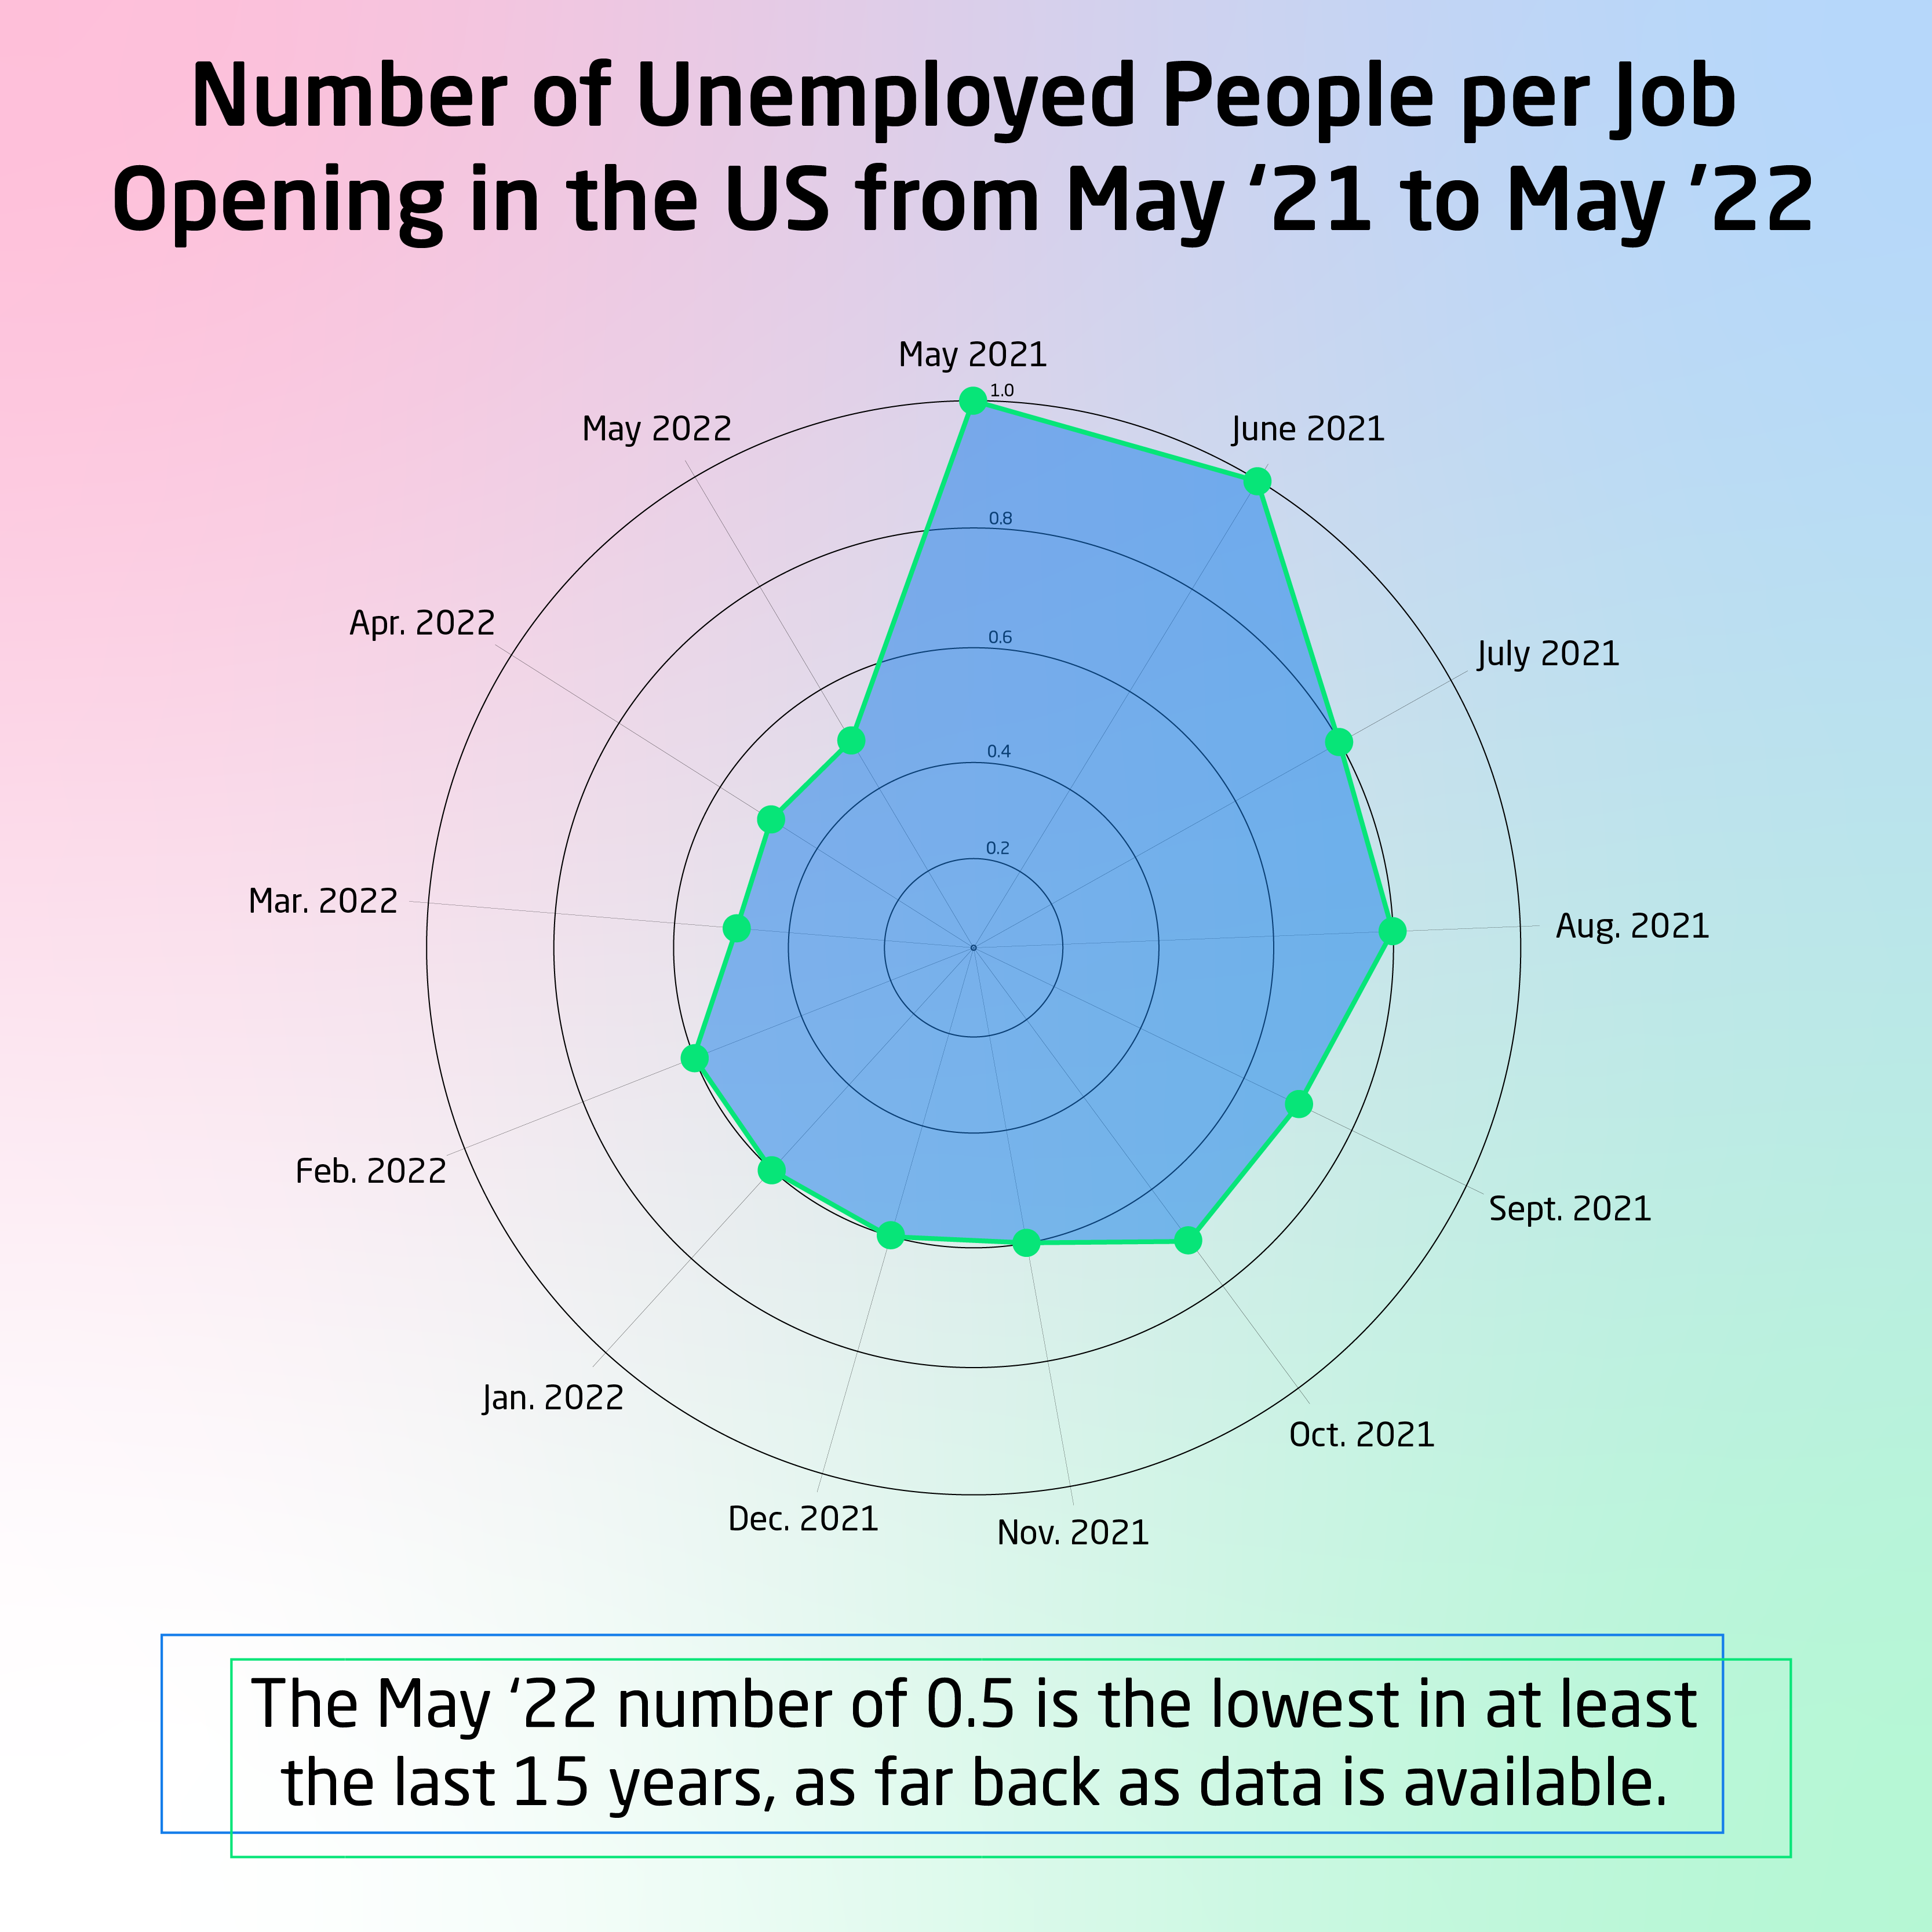 Infographic showing the Number of Unemployed People per Job Opening in the US from May 2021-22